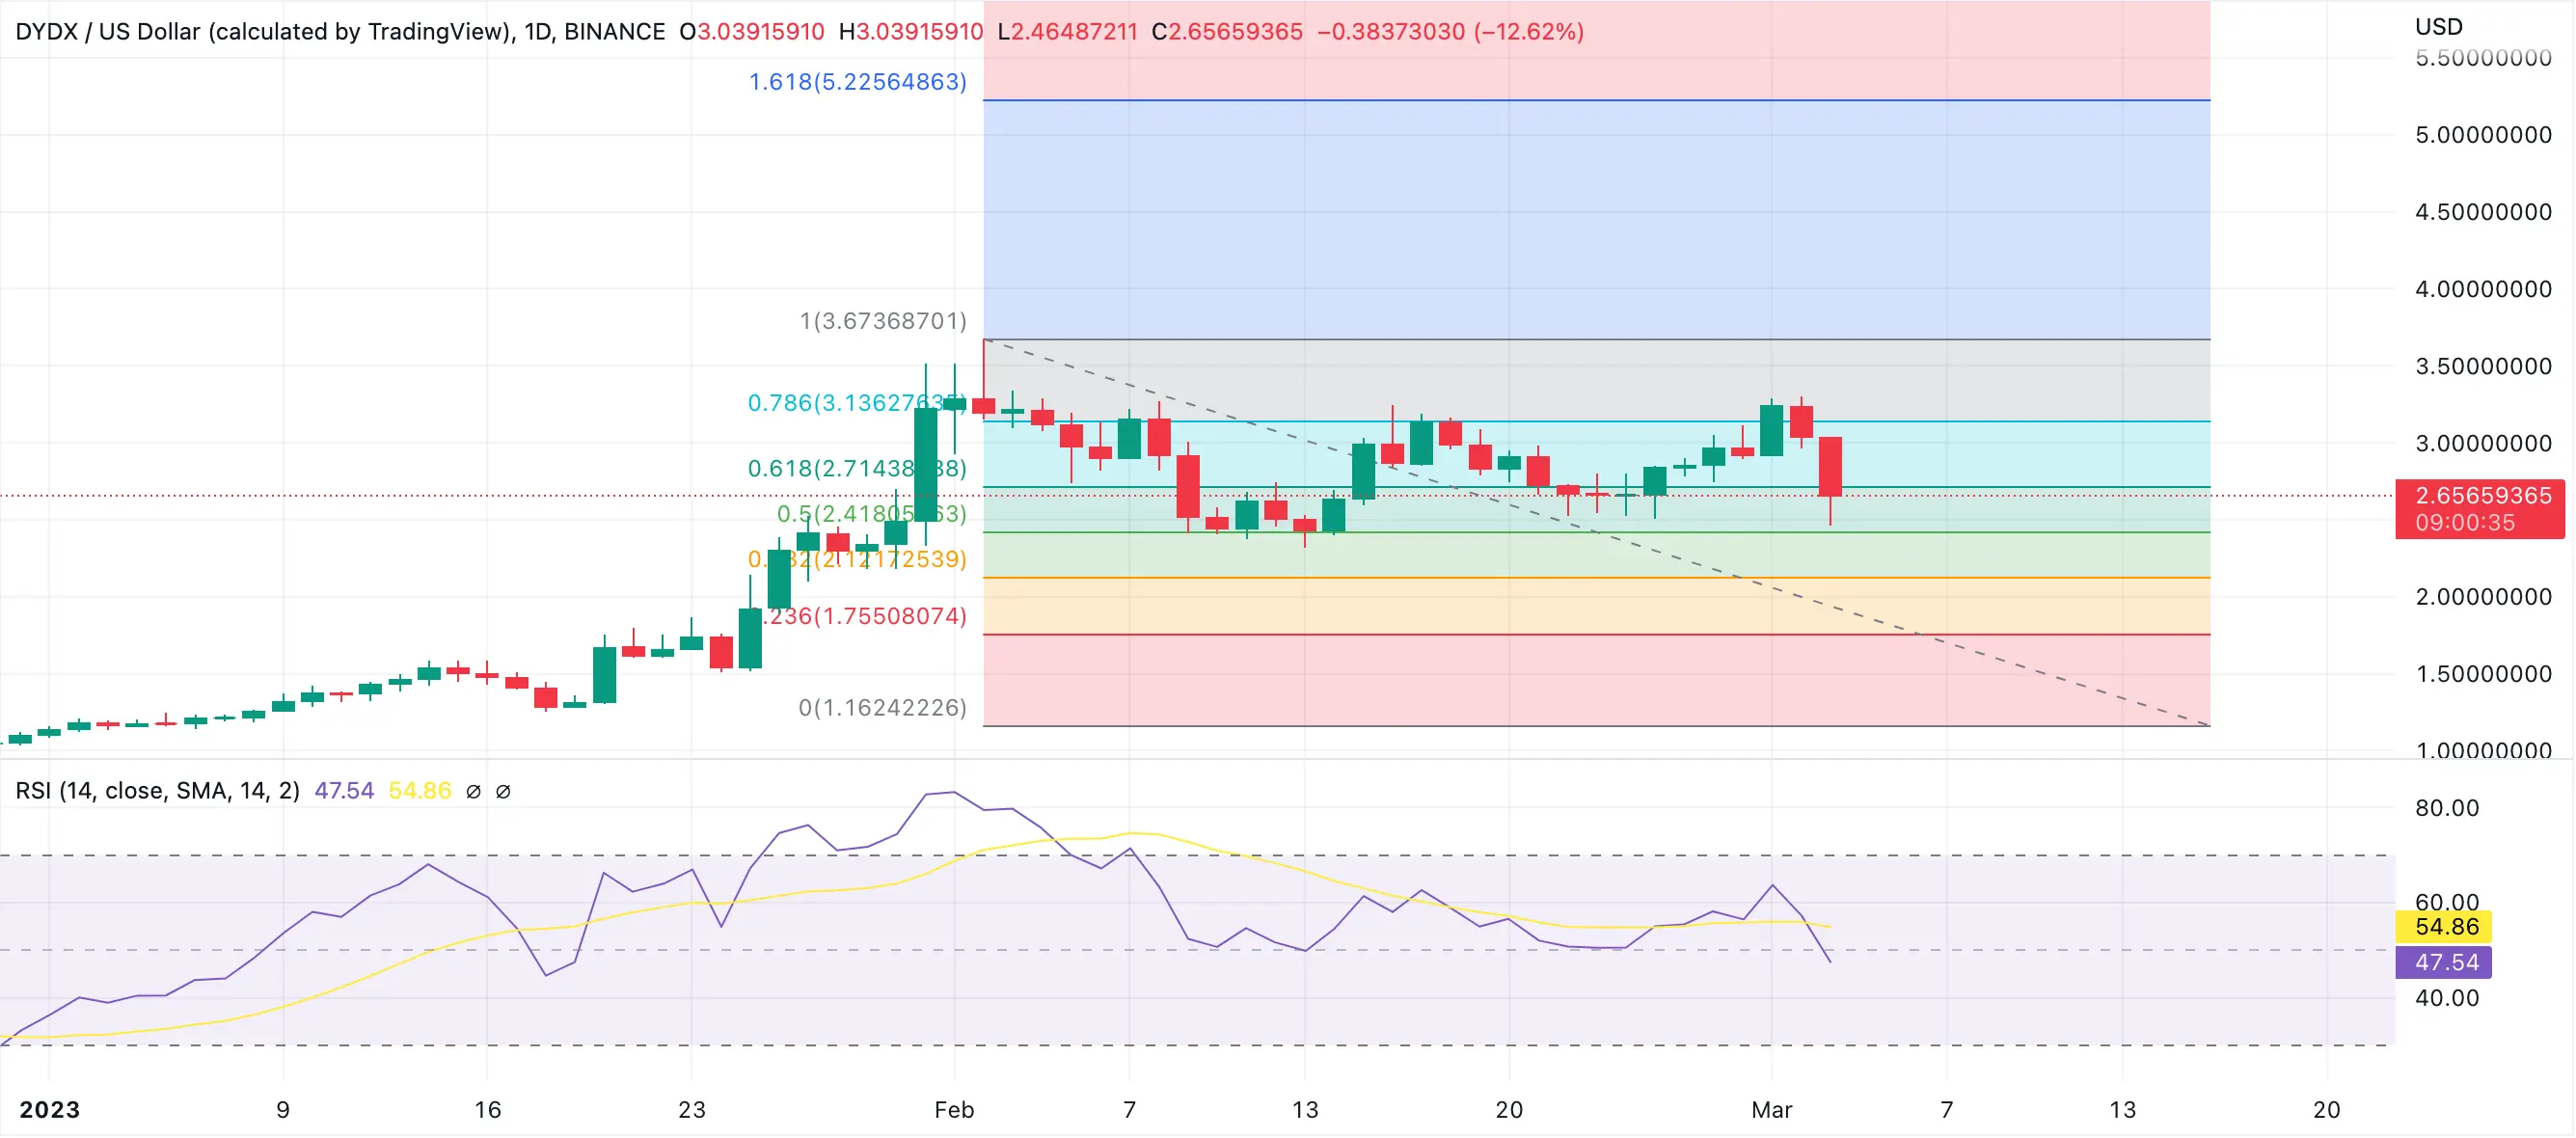 dydx price chart with technical analysis